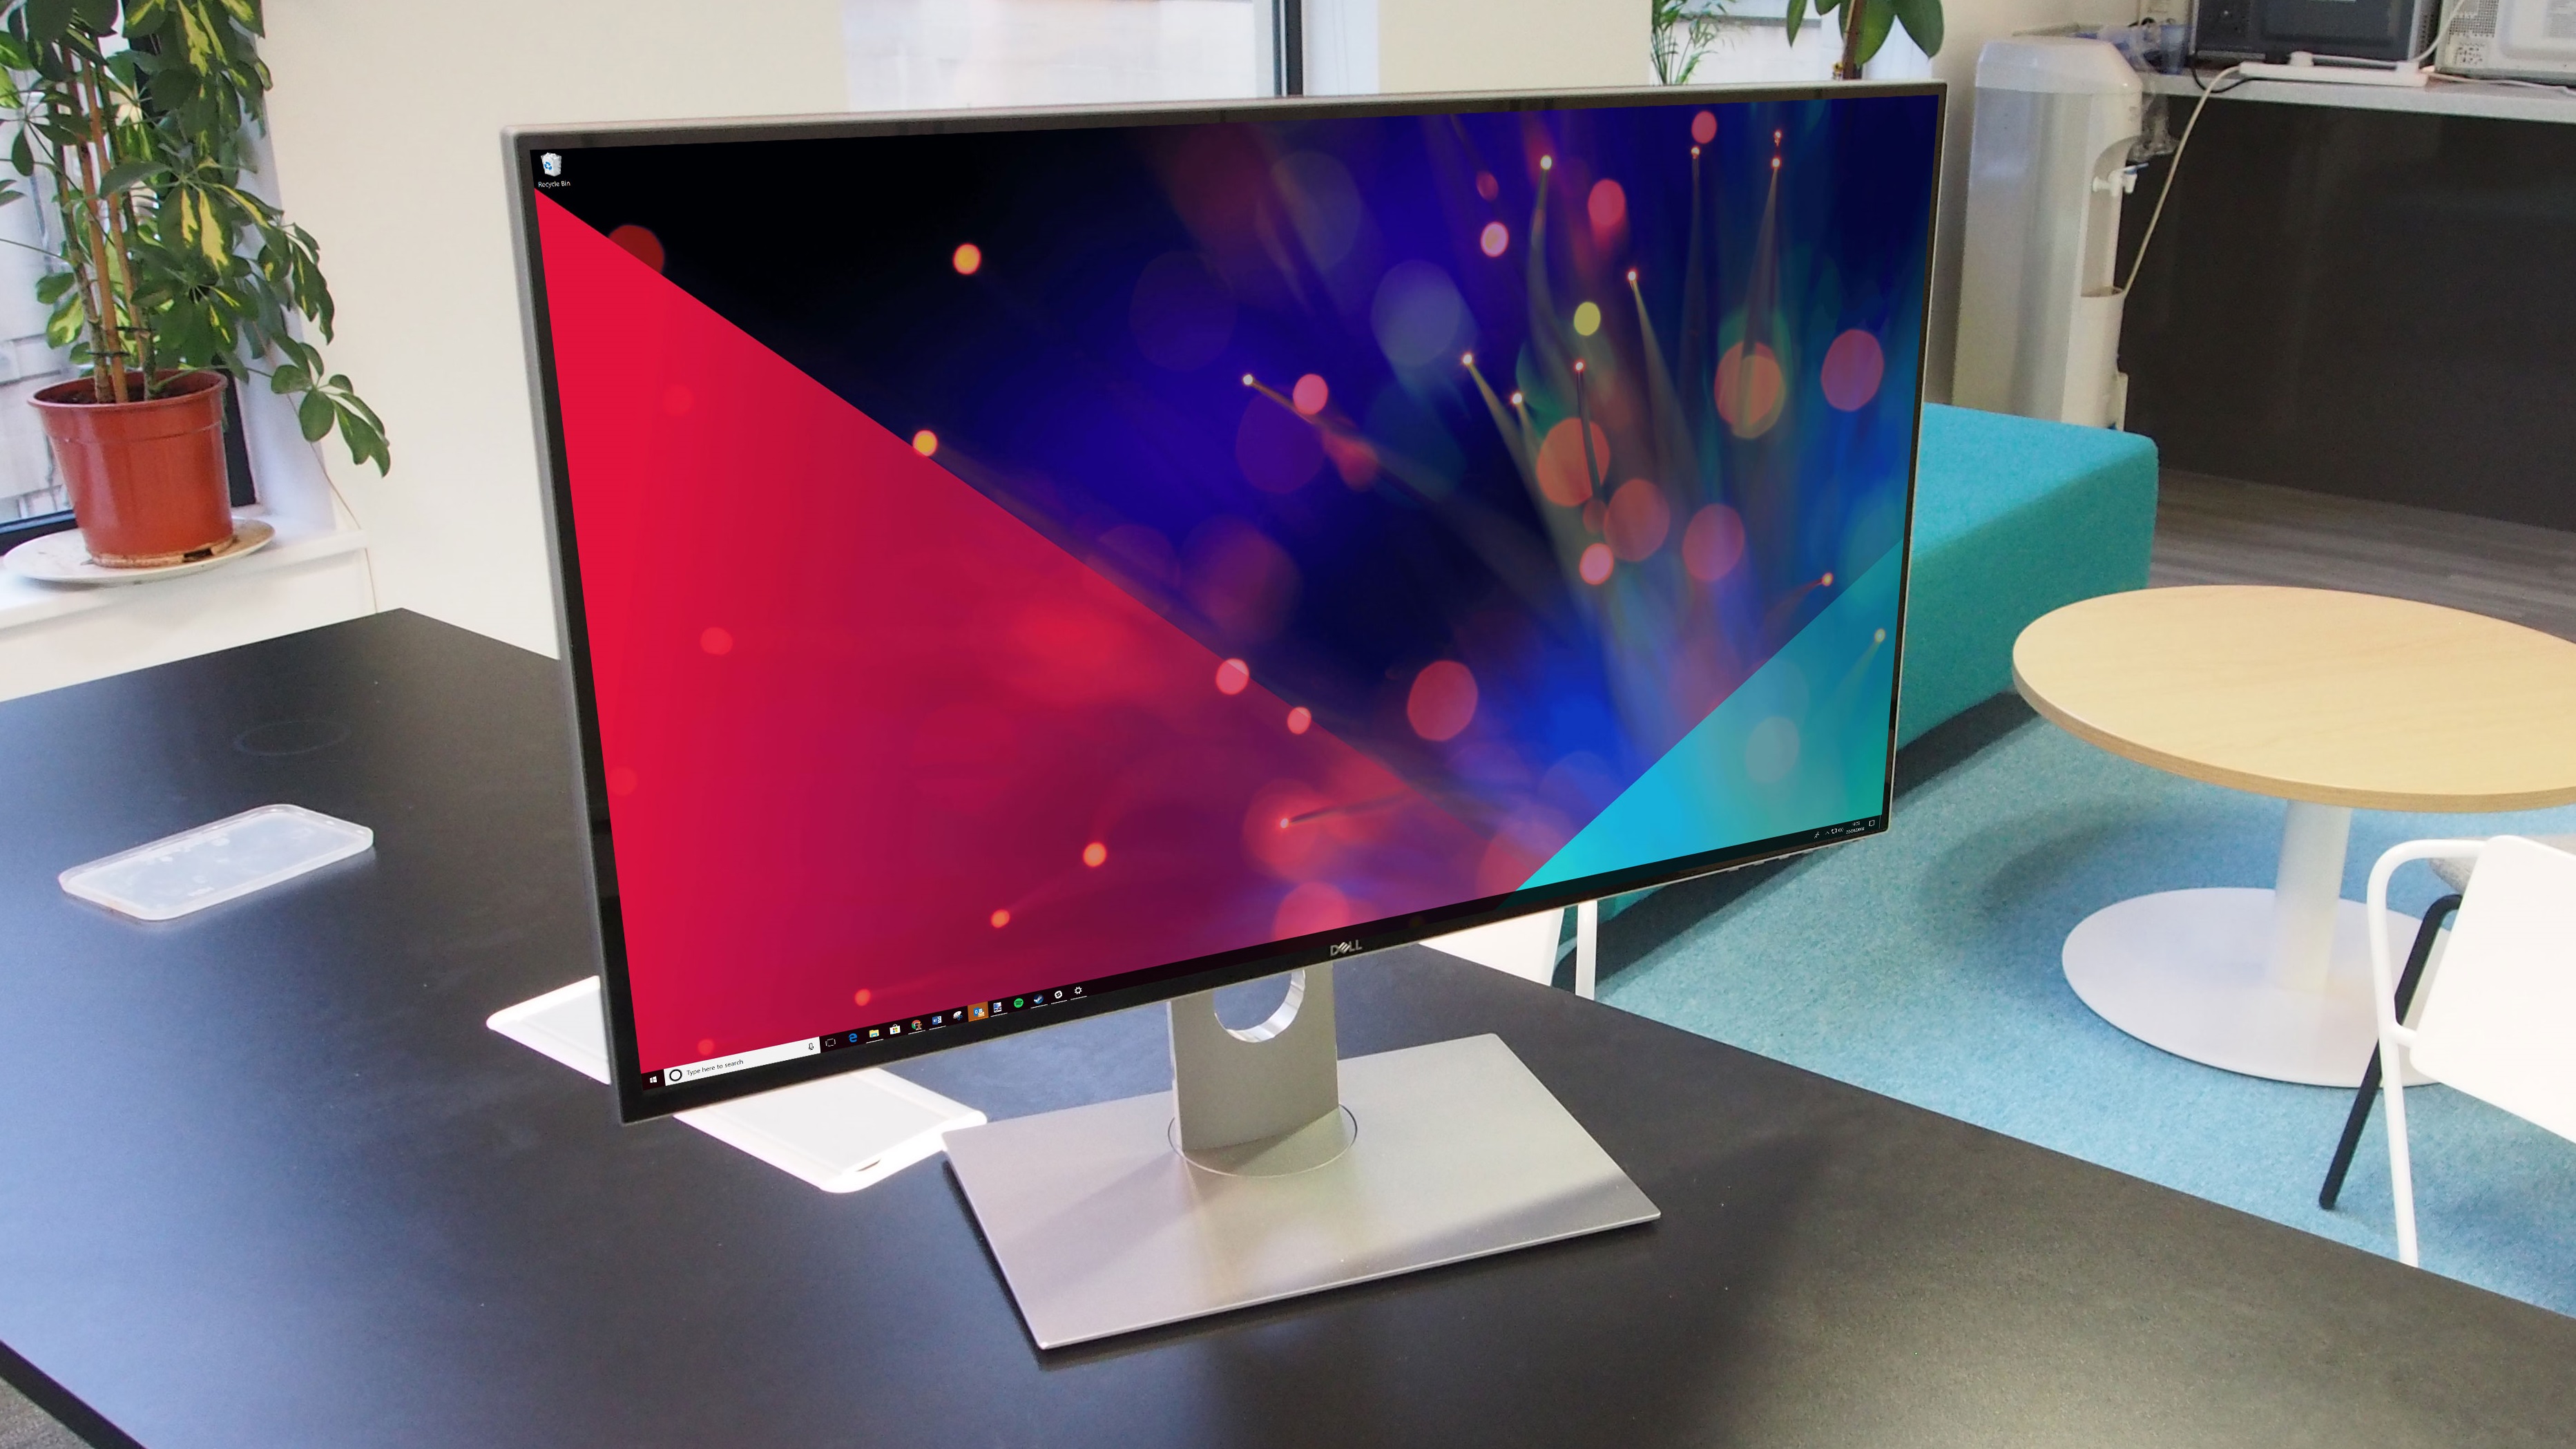 A monitor on a table in an open office